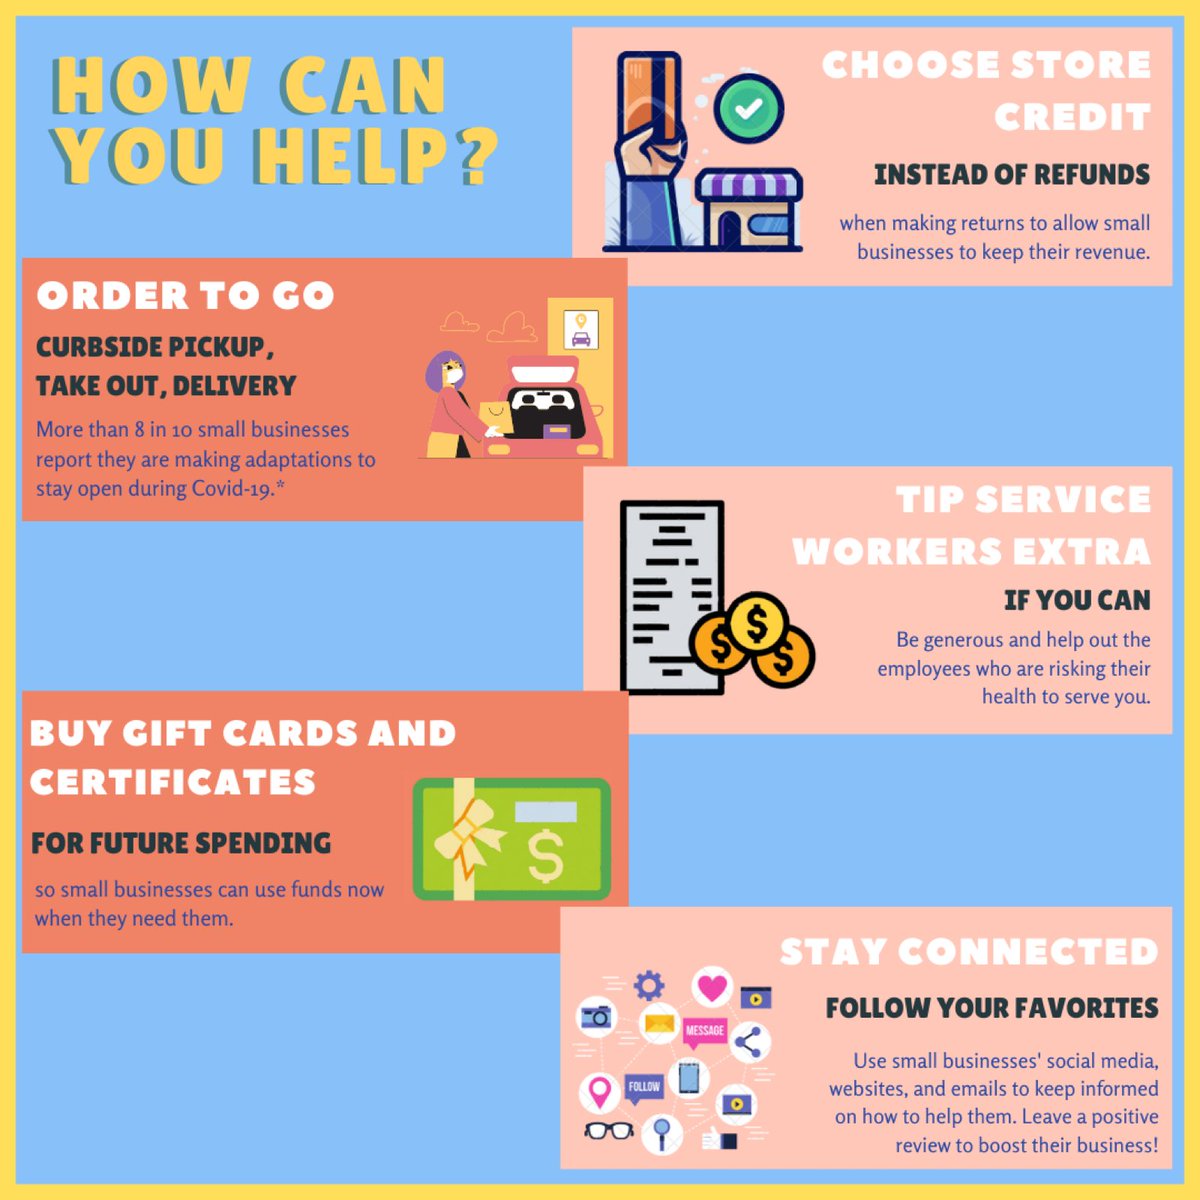 Olivia E from the NOVA Regional Officer Team created this infographic to explain how FBLA members can help small businesses affected by COVID-19! Swipe to see how you can make a difference in your community and why small businesses are important. 
#AspireToHelp #AspireToLead